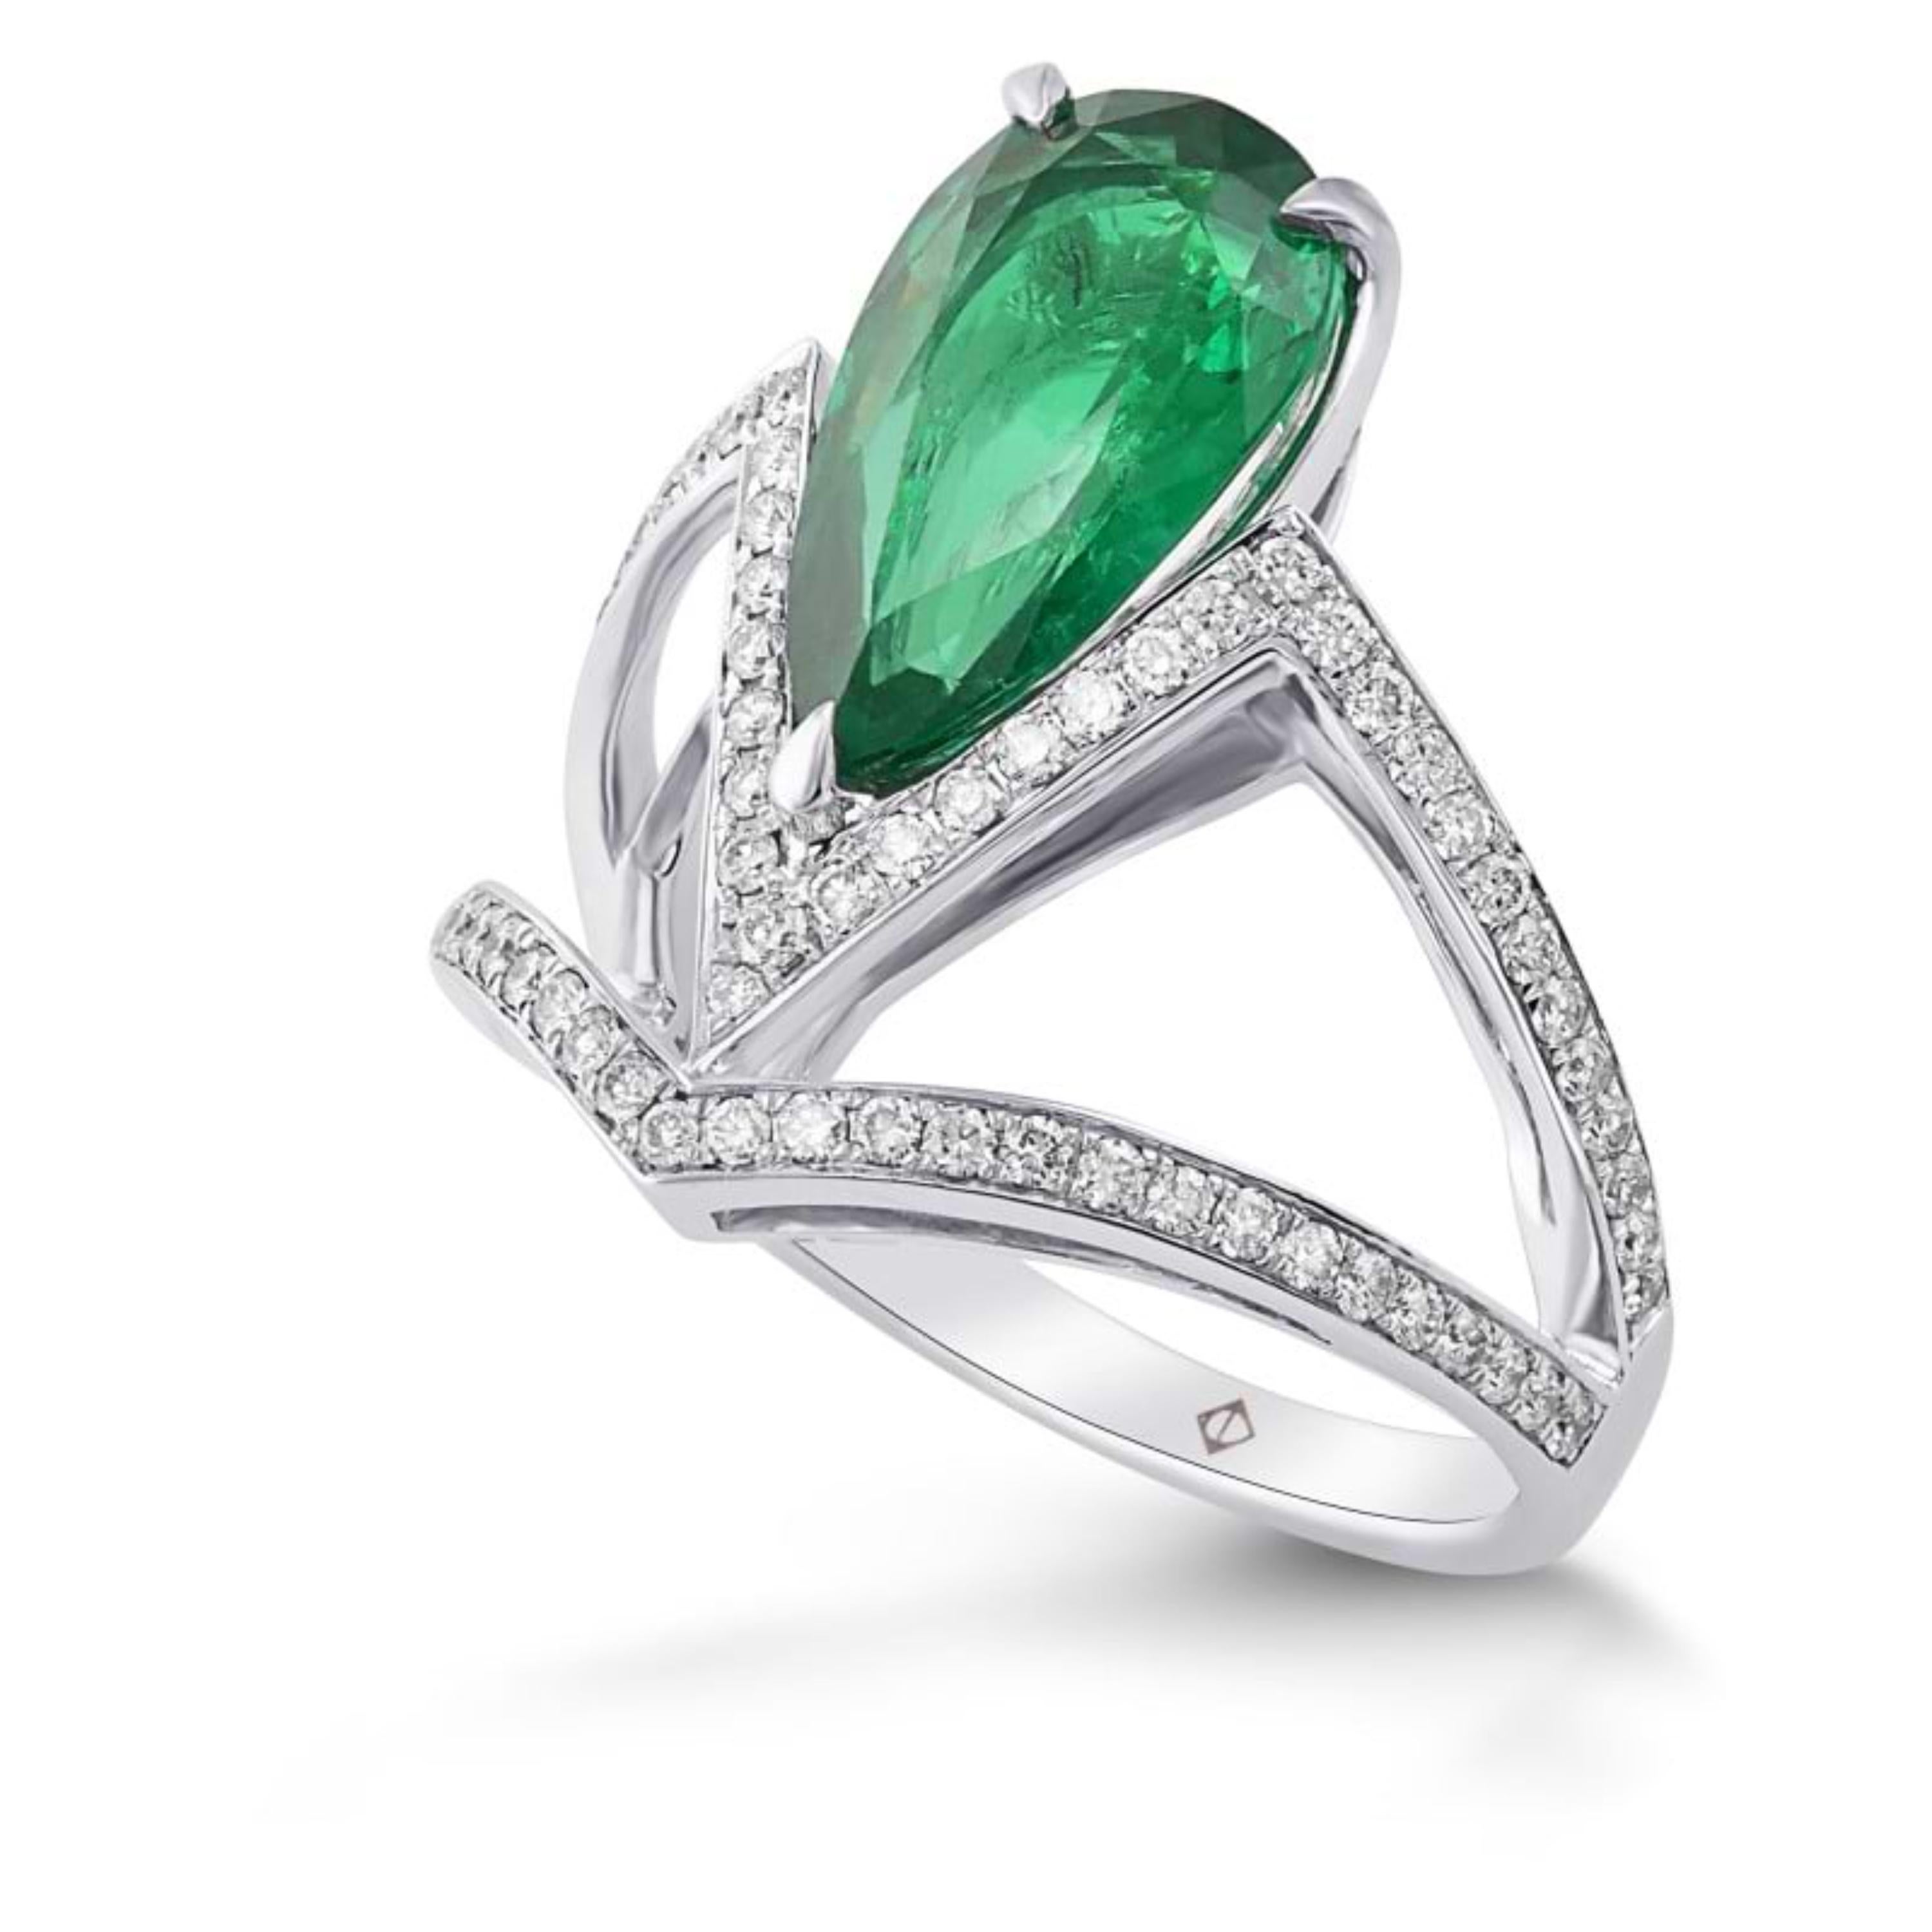 Art Deco Style 2.55 Carat Pear Cut Natural Emerald Diamond Cocktail Ring Band

A stunning ring featuring IGI/GIA Certified 2.55 Carat Natural Emerald and 0.42 Carat of Diamond Accents set in 18K Solid Gold.

Emeralds are highly valued for their